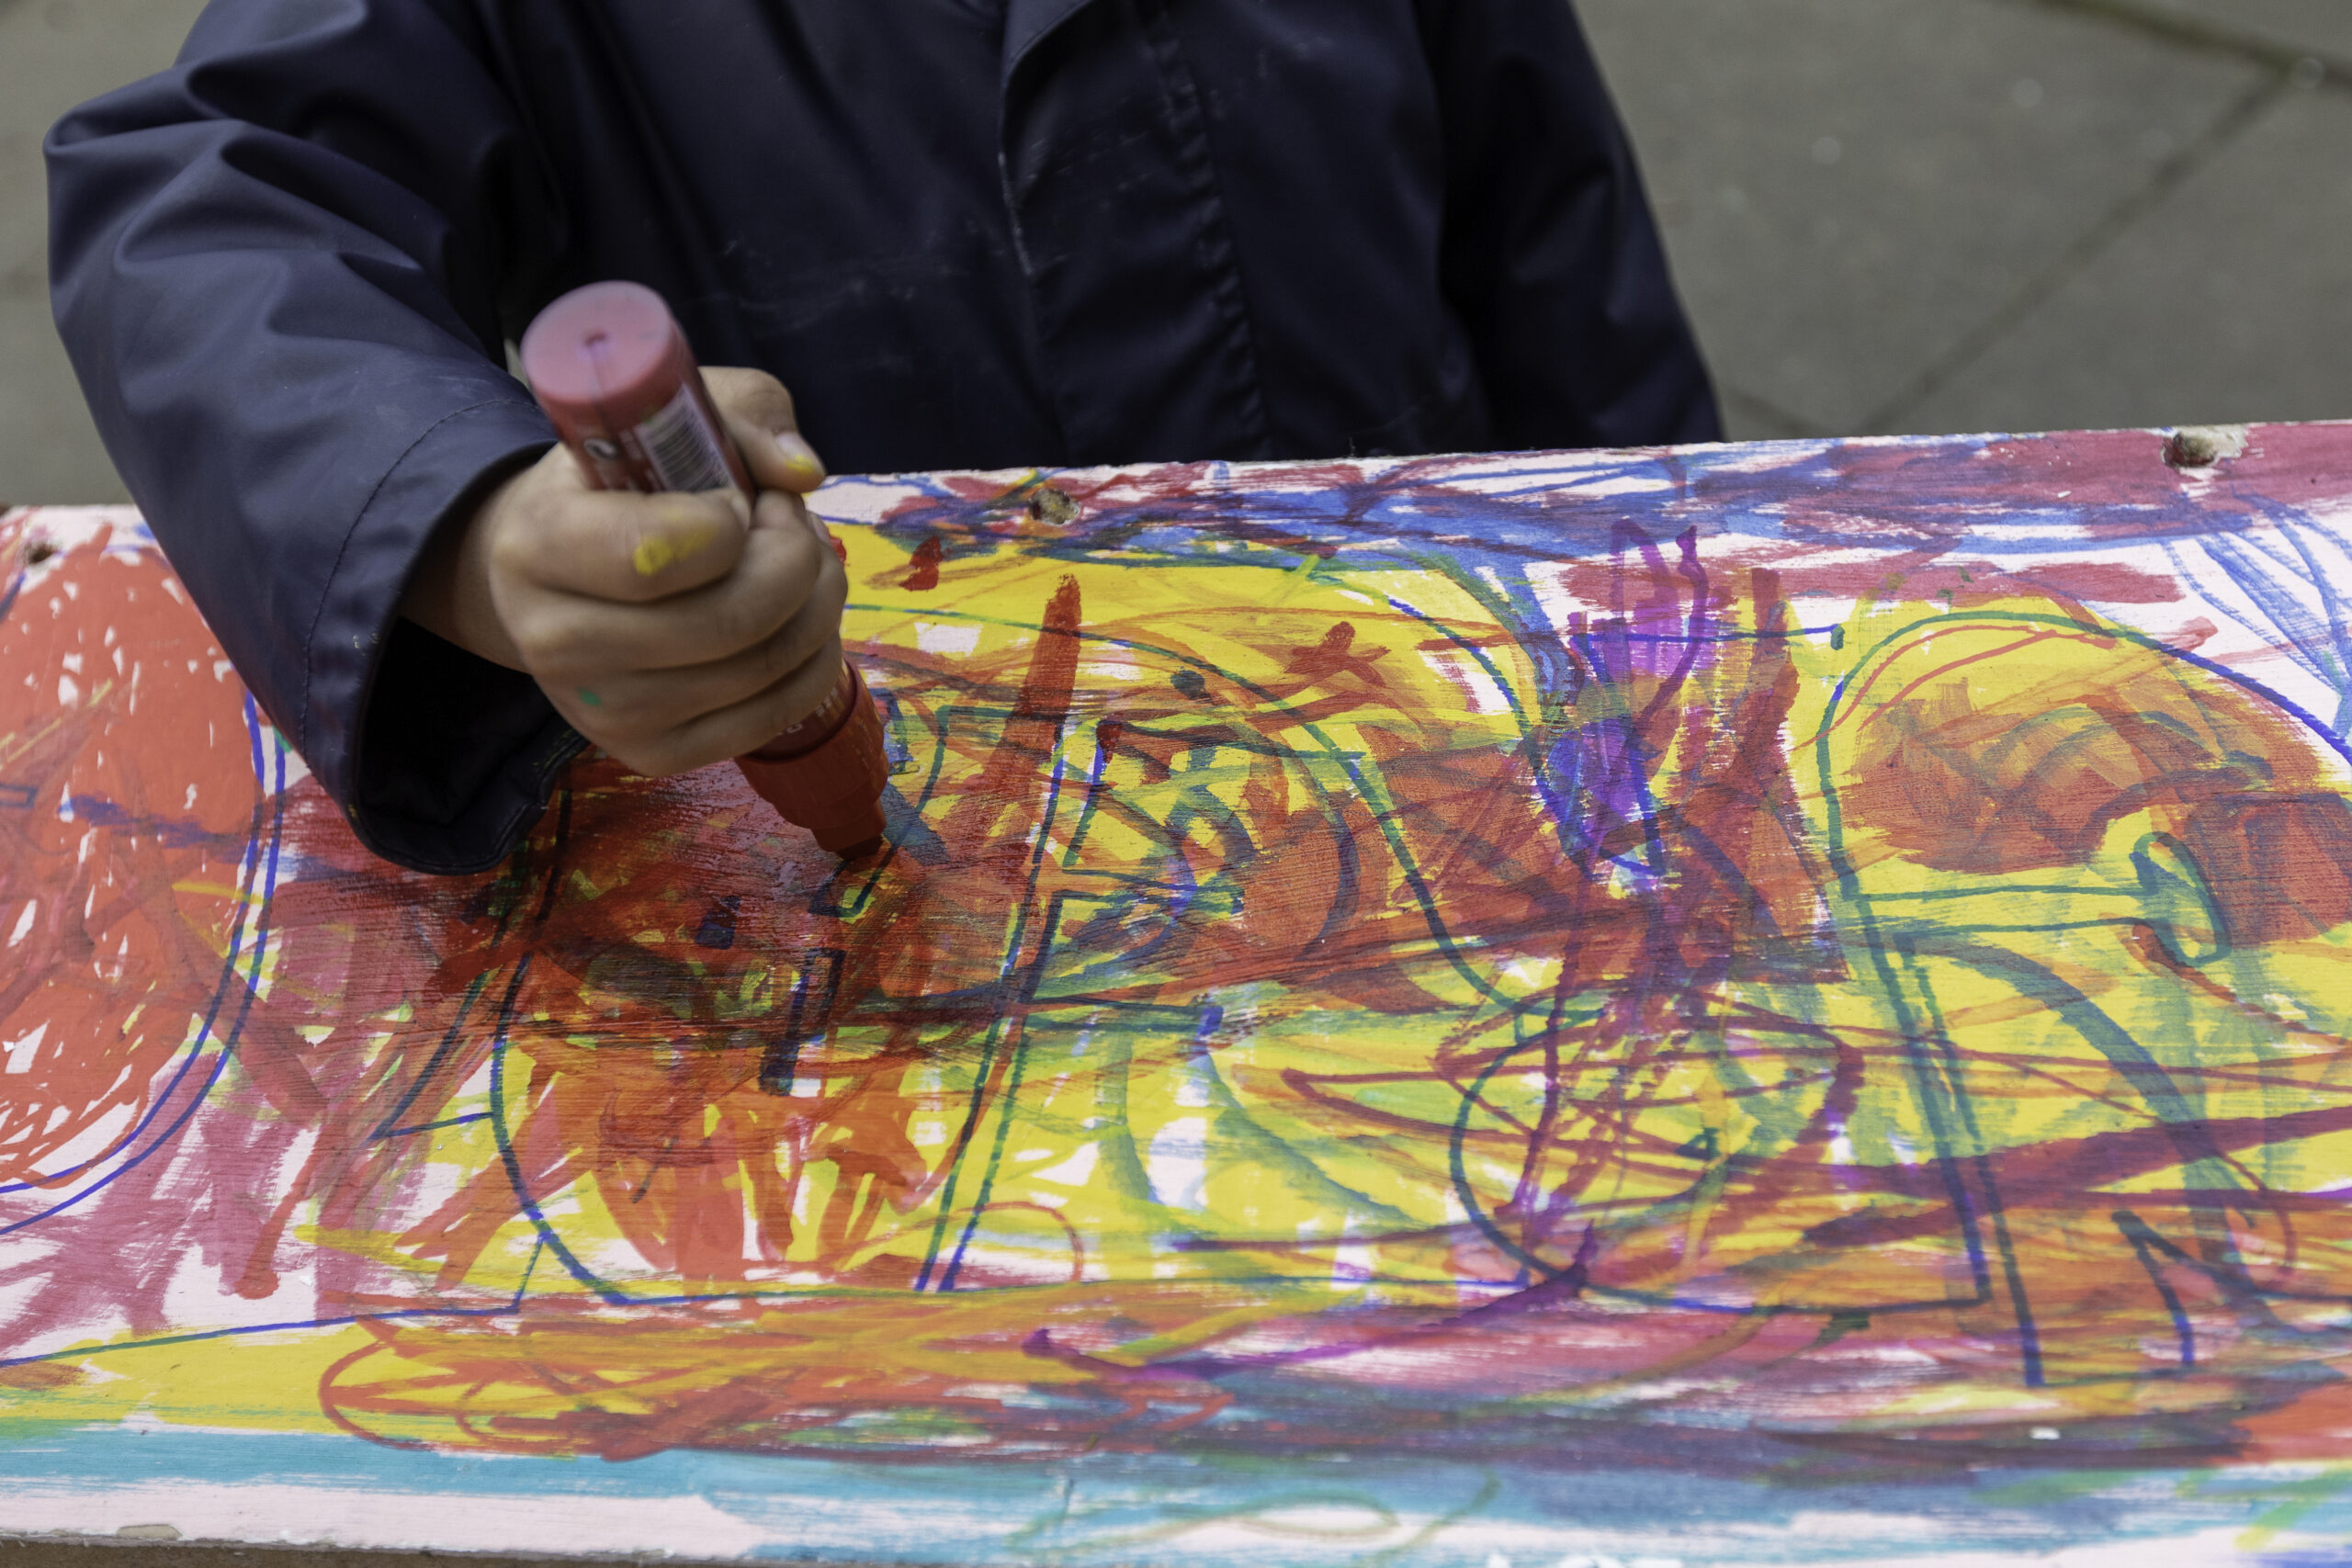 Free art activities this autumn for Brent families